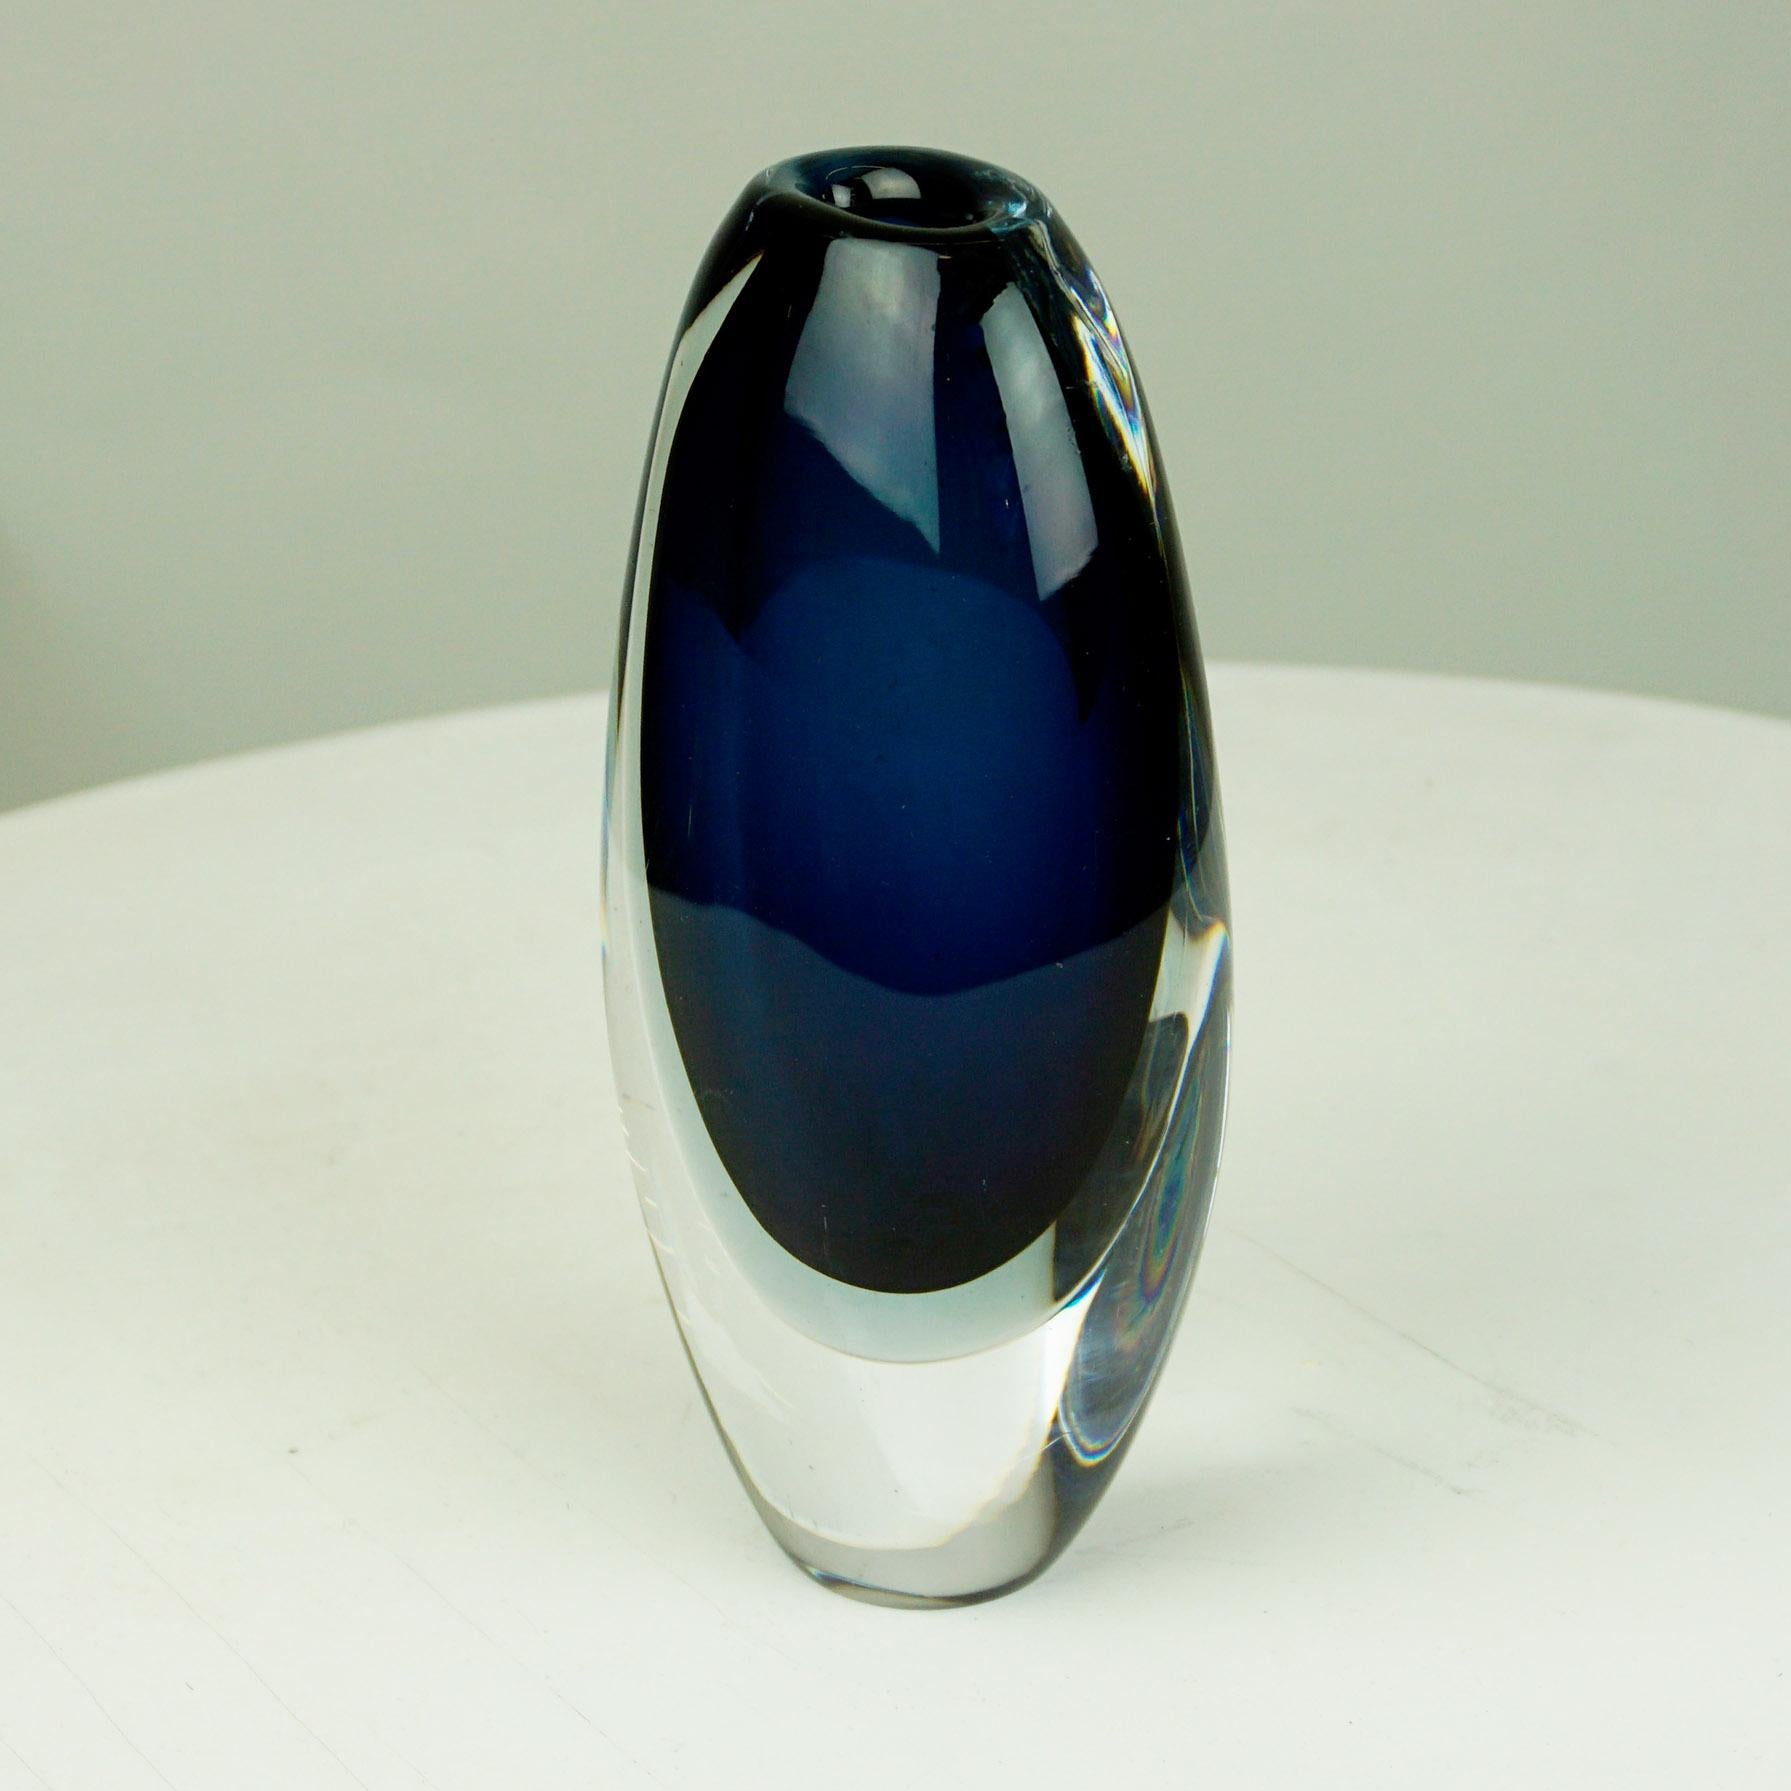 Beautiful two-tone dark and bright Blue Scandinavian Modern Sommerso glass vase, produced circa 1950s-1960s by Kosta Sweden and designed by Vicke Lindstrand.
The underside shows the incised signature with Model Number, Kosta LH 1836
Excellent